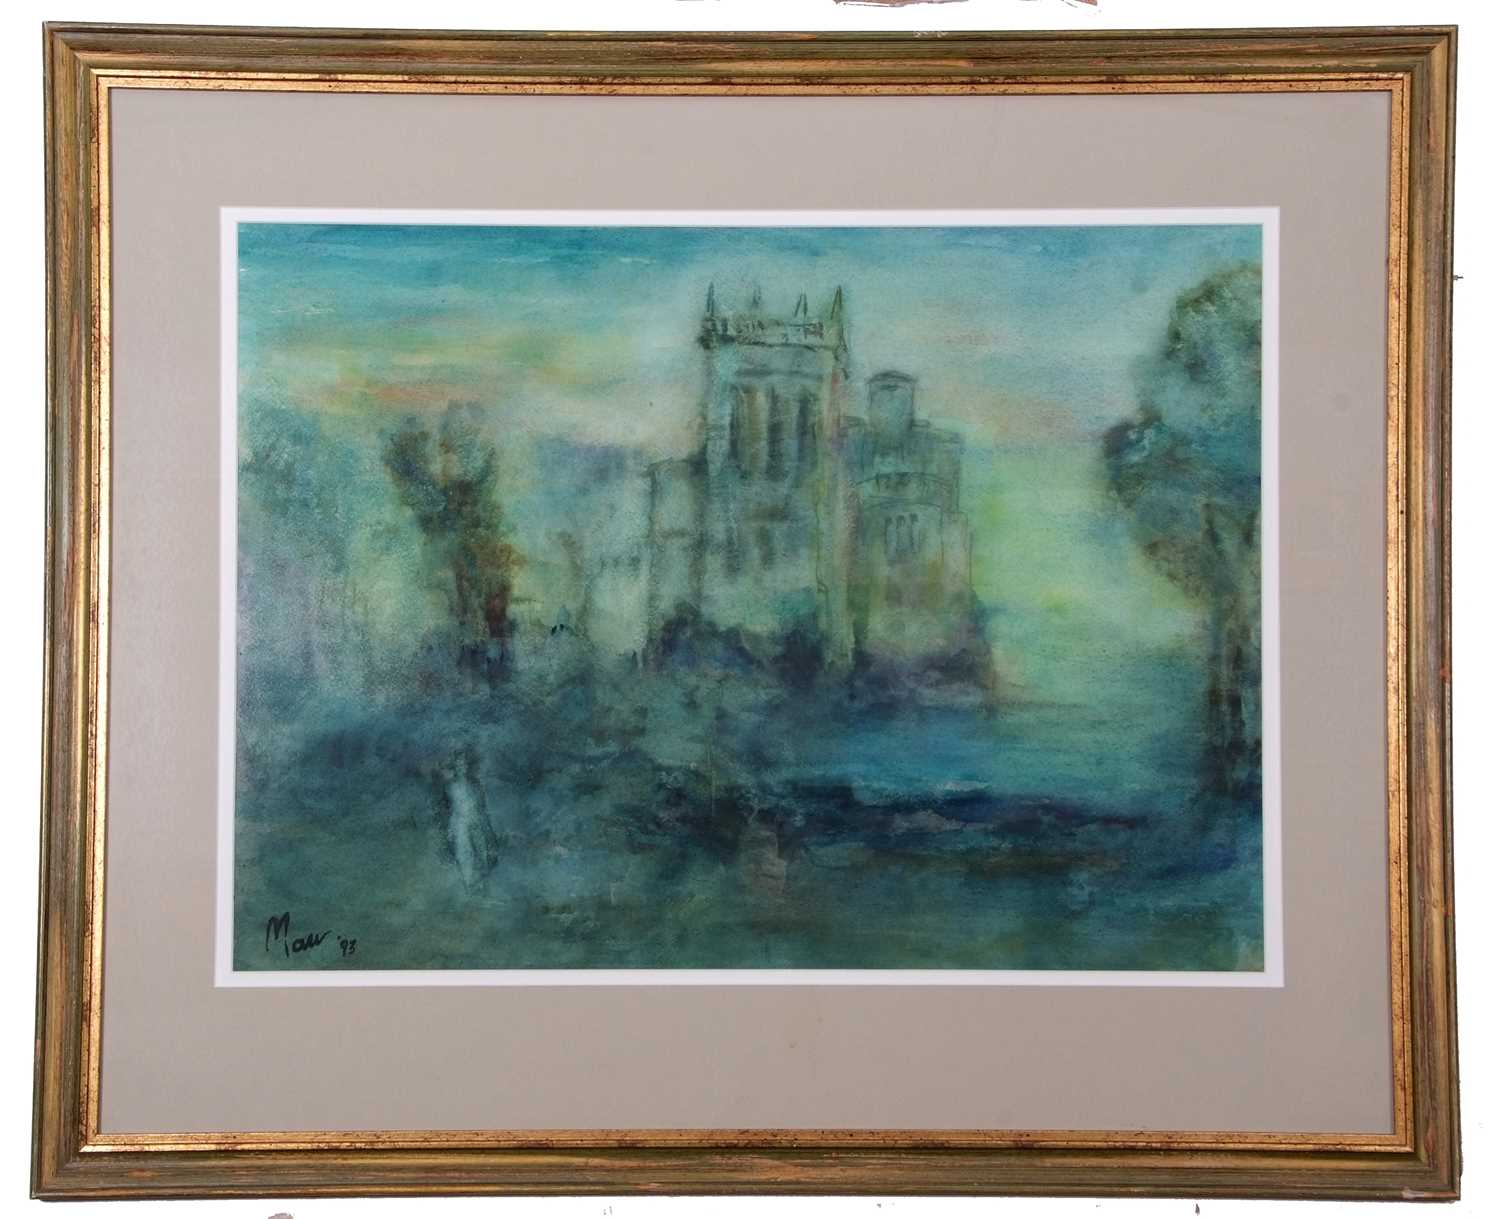 Leslie Marr (1922-2021) Priory with figure in the foreground, watercolour and wash, signed and dated